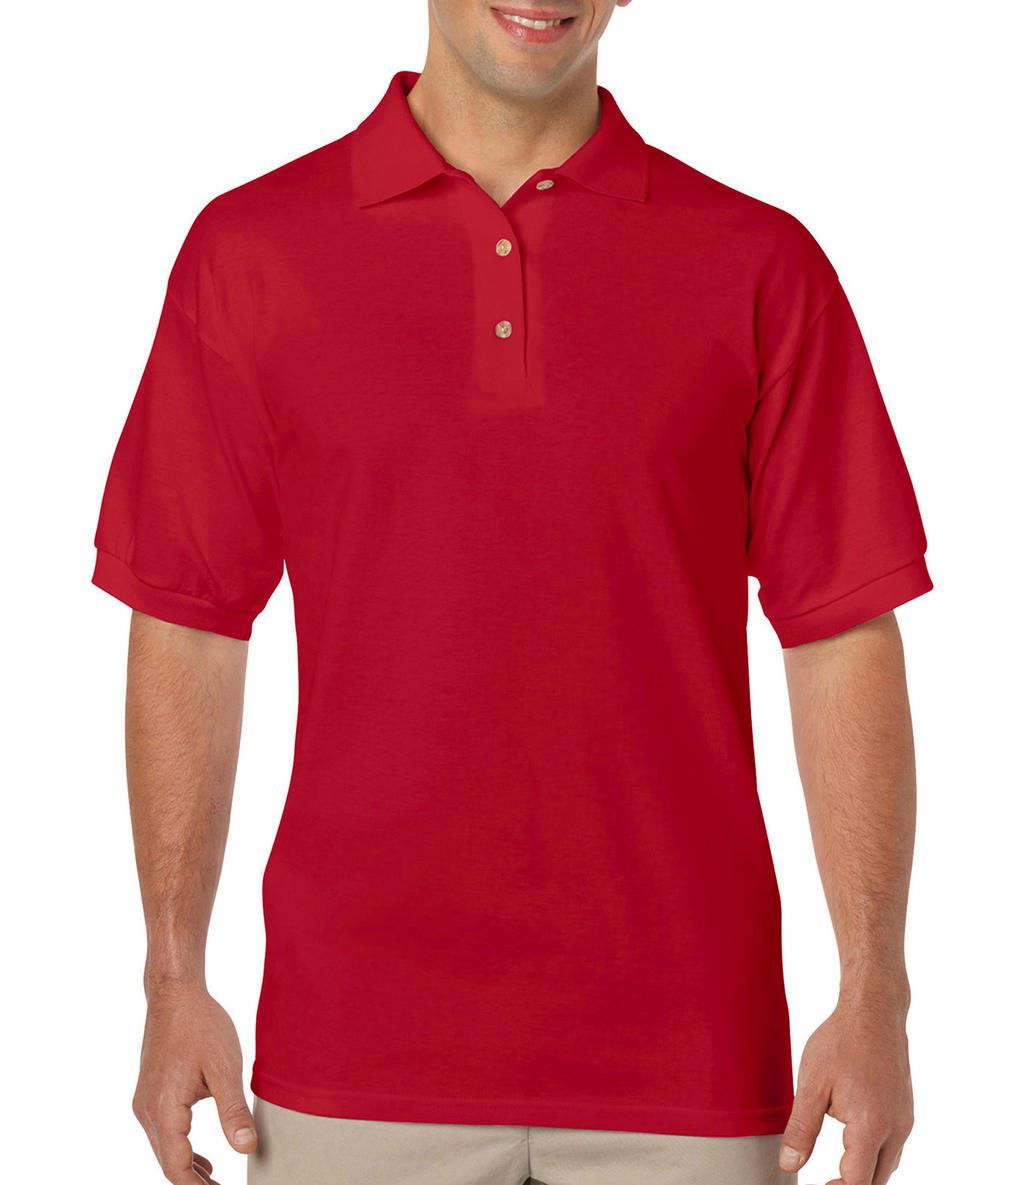  DryBlend Adult Jersey Polo in Farbe Red